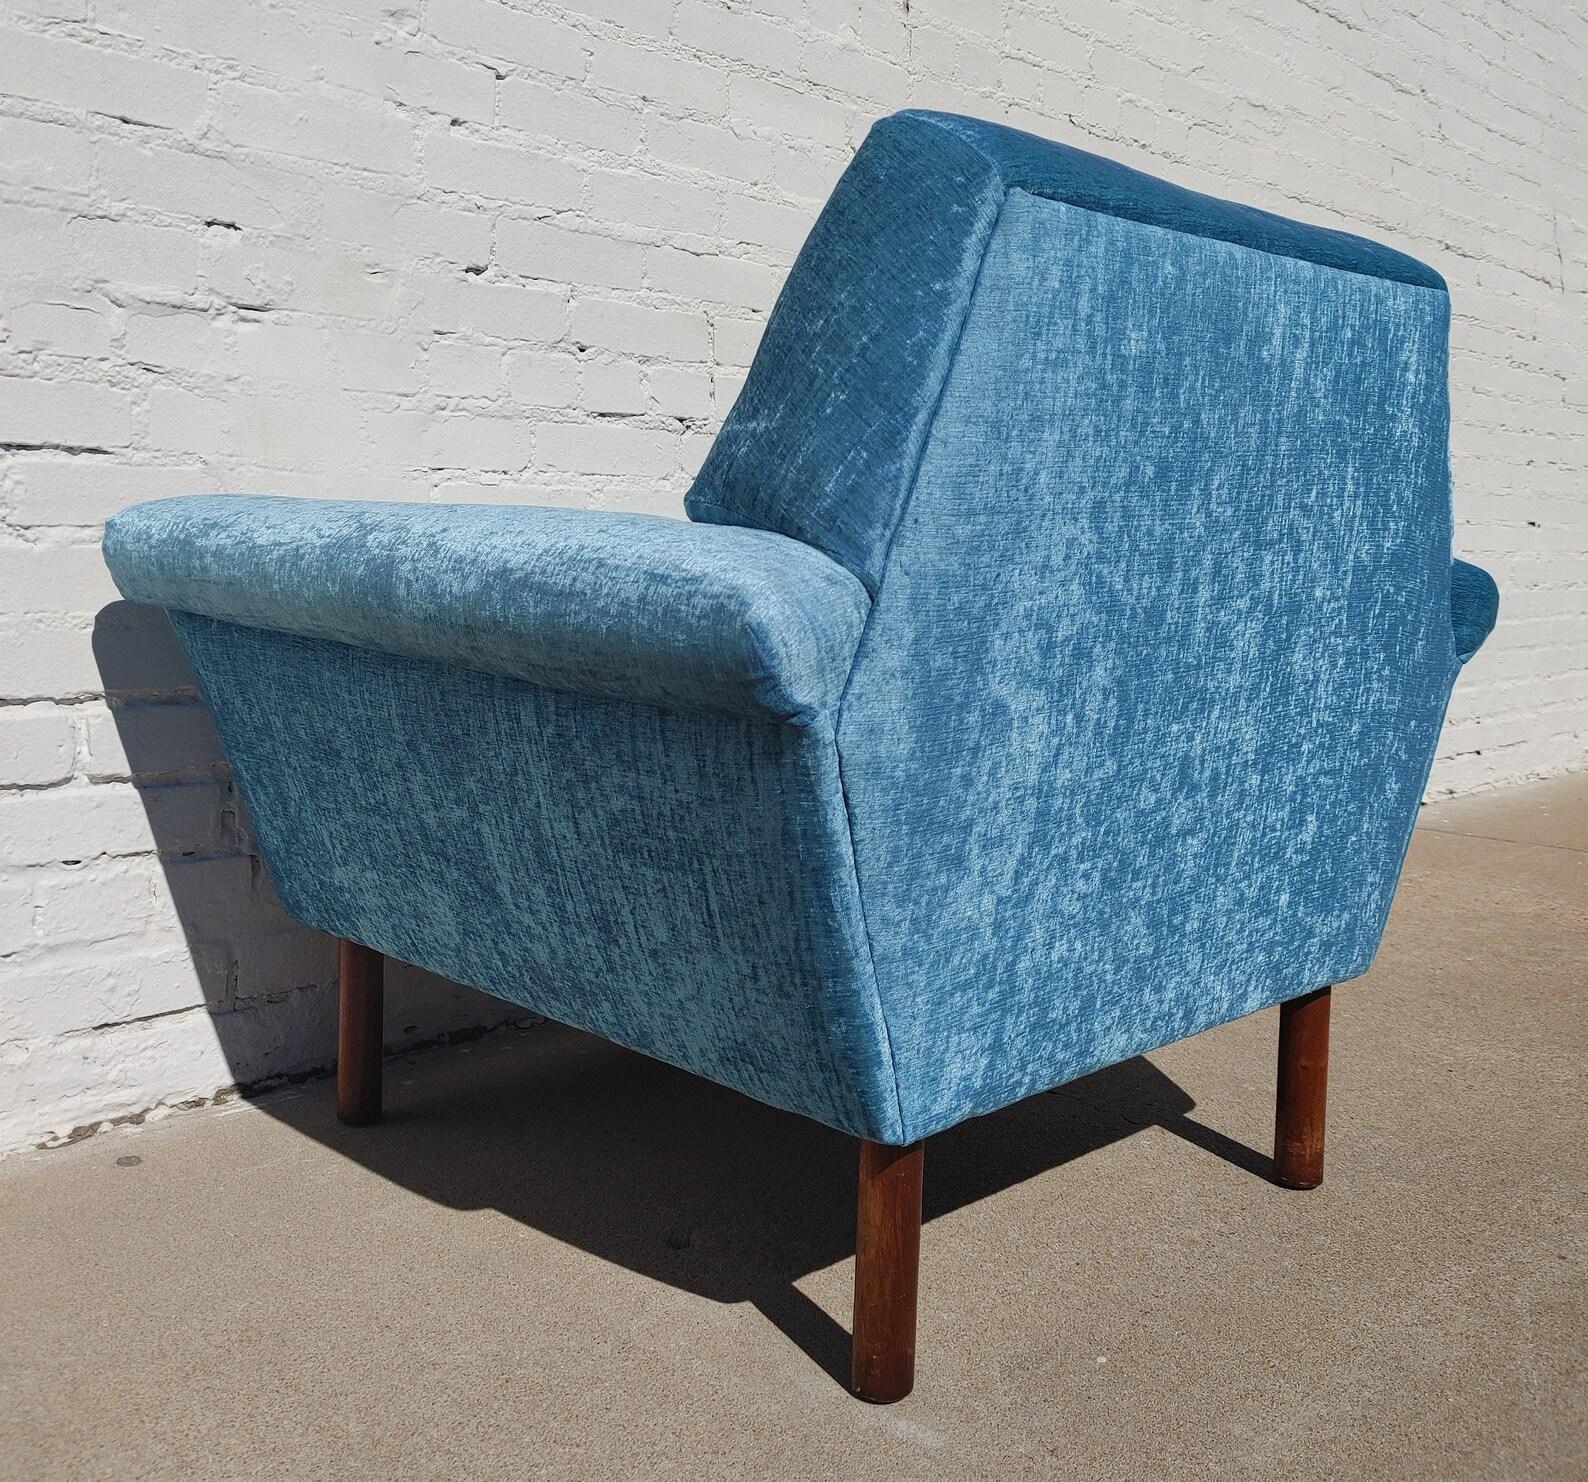 Mid Century Modern Flexsteel Sidechair

Above average vintage condition and structurally sound. Has some expected slight finish wear and scratching on legs. 
Seat cushions is a slightly different fabric than body.  Outdoor listing pictures might